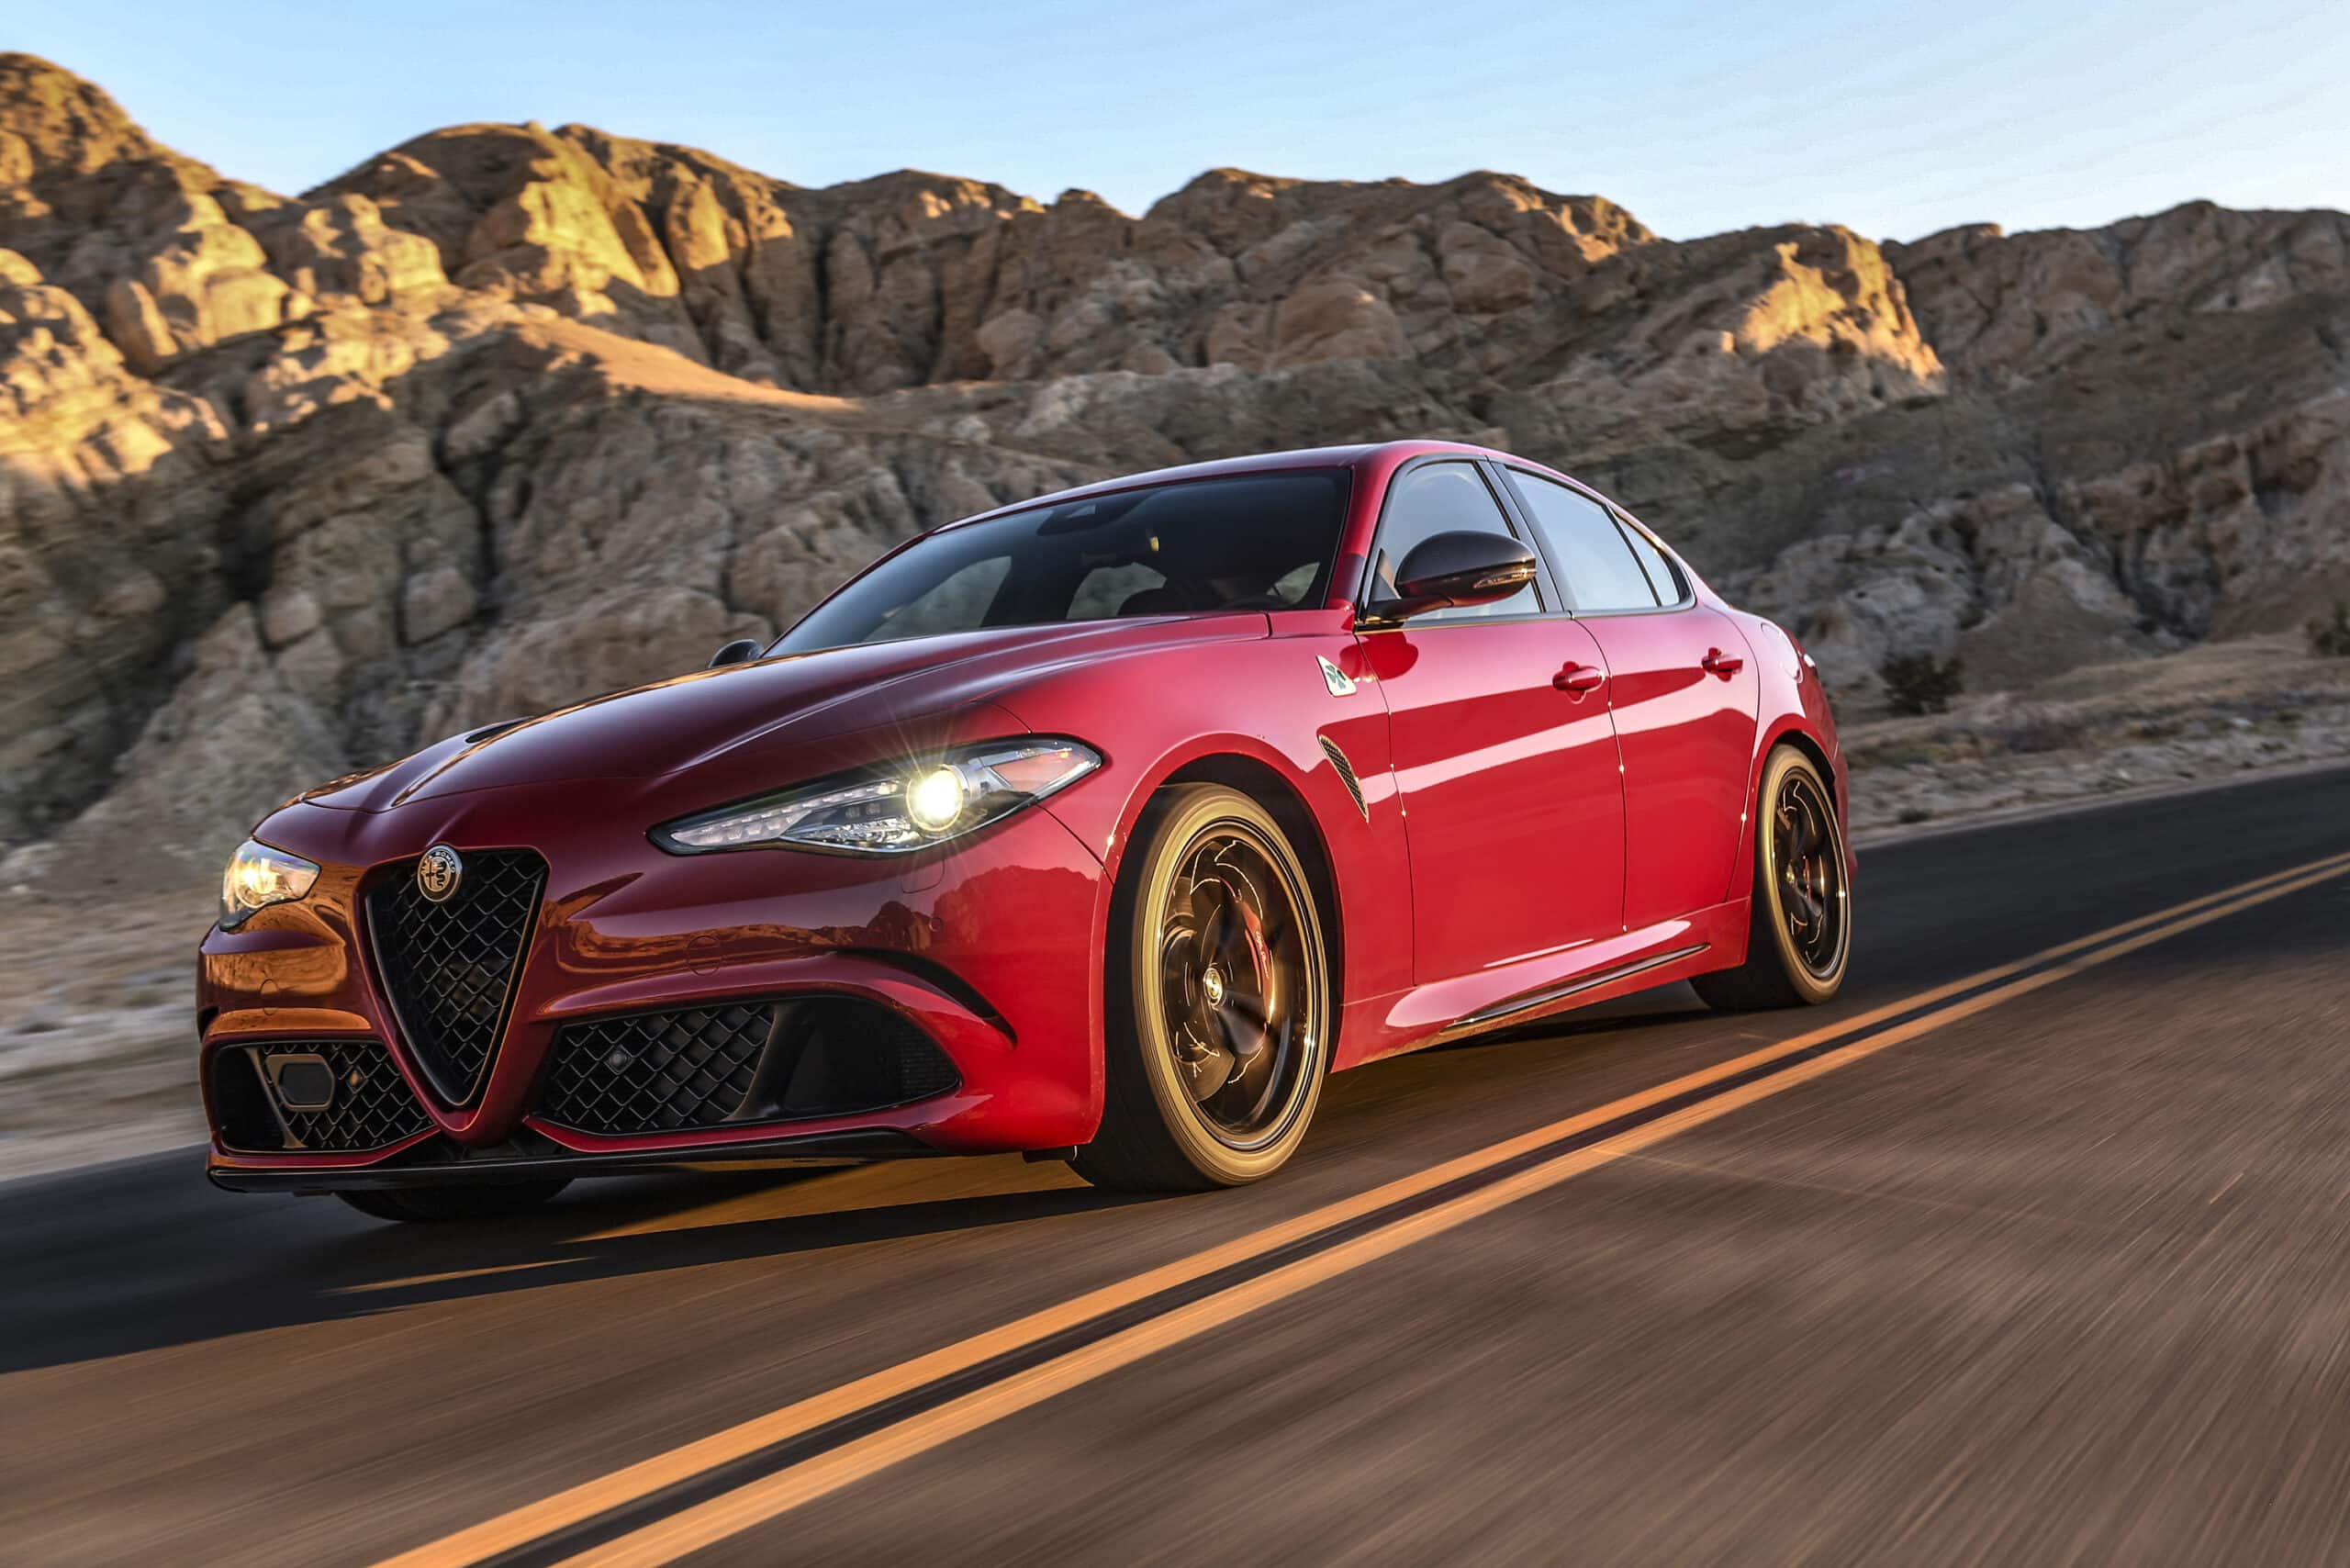 Alfa Romeo is recalling certain 2017-2020 vehicles for issues with ceramic brake system